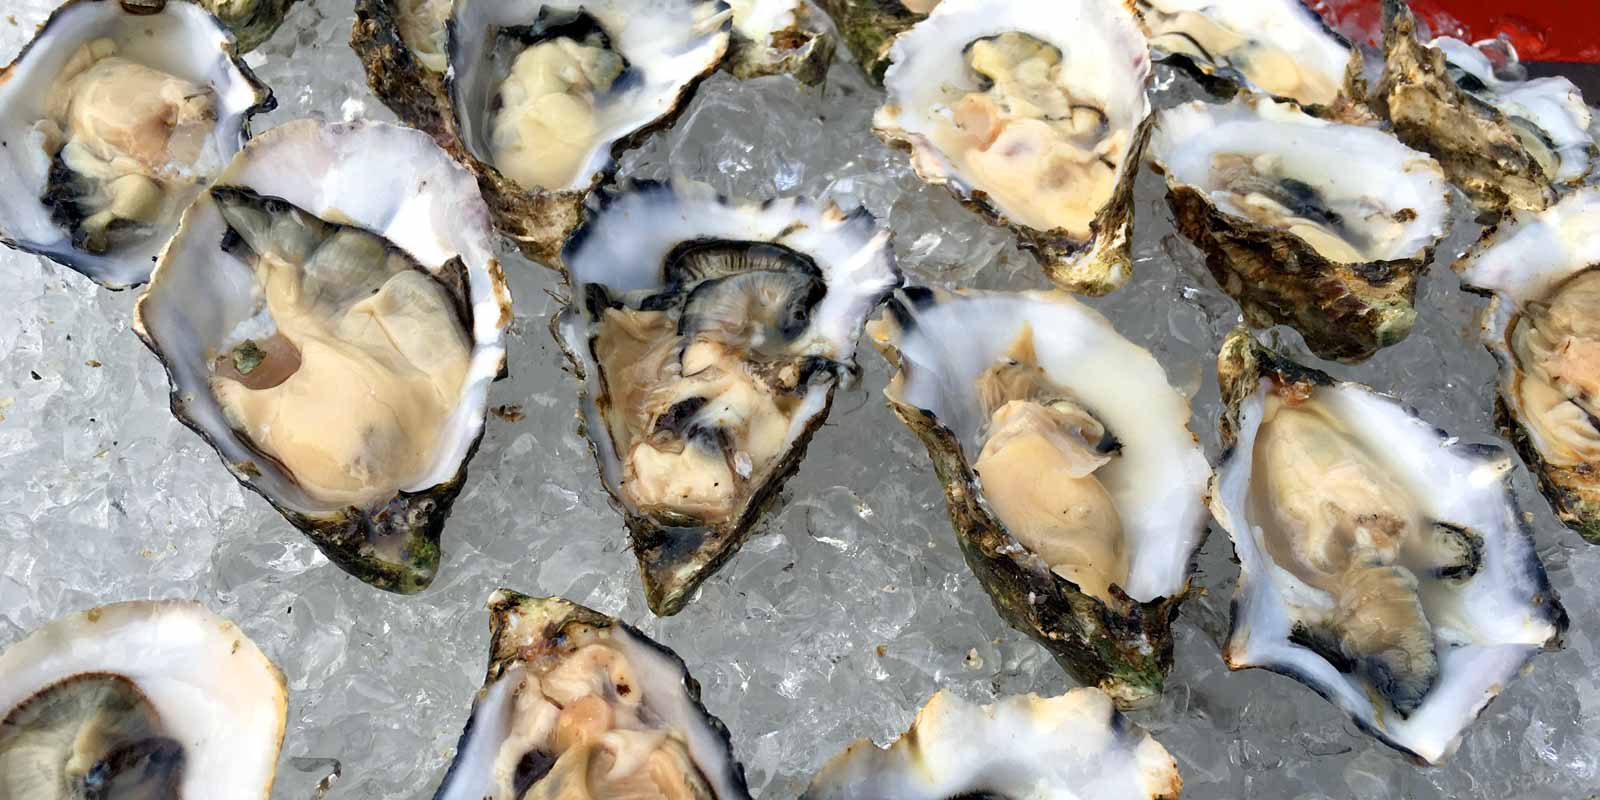 Gillardeau oysters Fresh, fleshy and with an iodine flavor, but at the same time delicate and with a slightly nutty aftertaste: the Gillardeau oysters from Marennes-Oleron are considered by connoisseurs to be the finest of the finest.